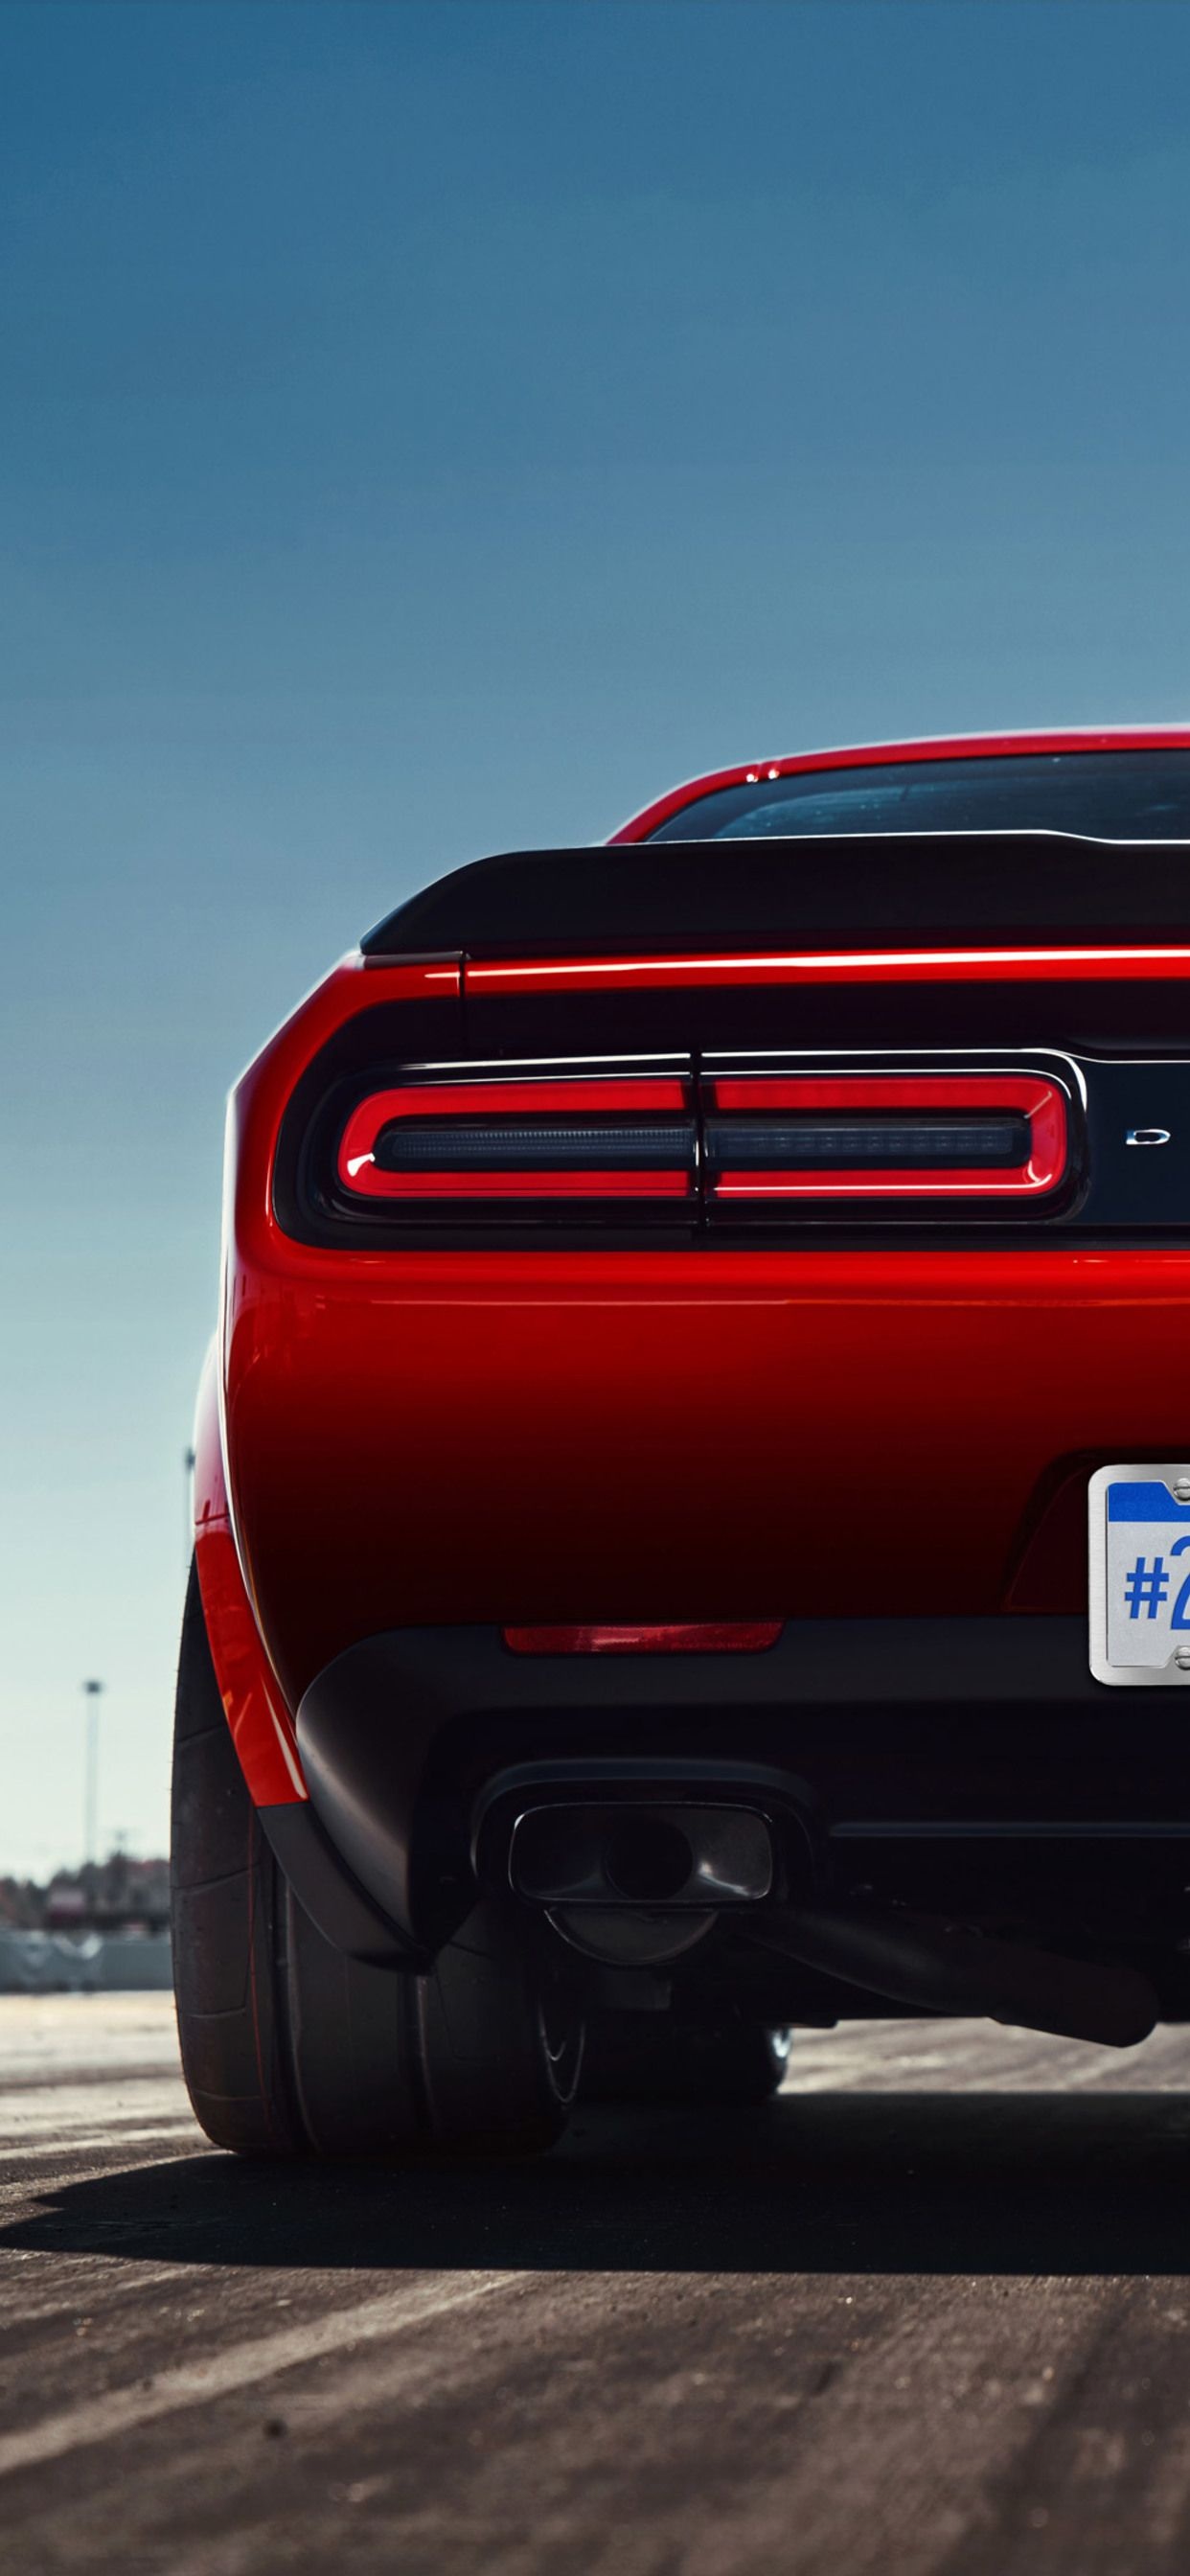 Dodge Challenger, High-quality iPhone wallpapers, Sleek and stylish, 1250x2690 HD Handy